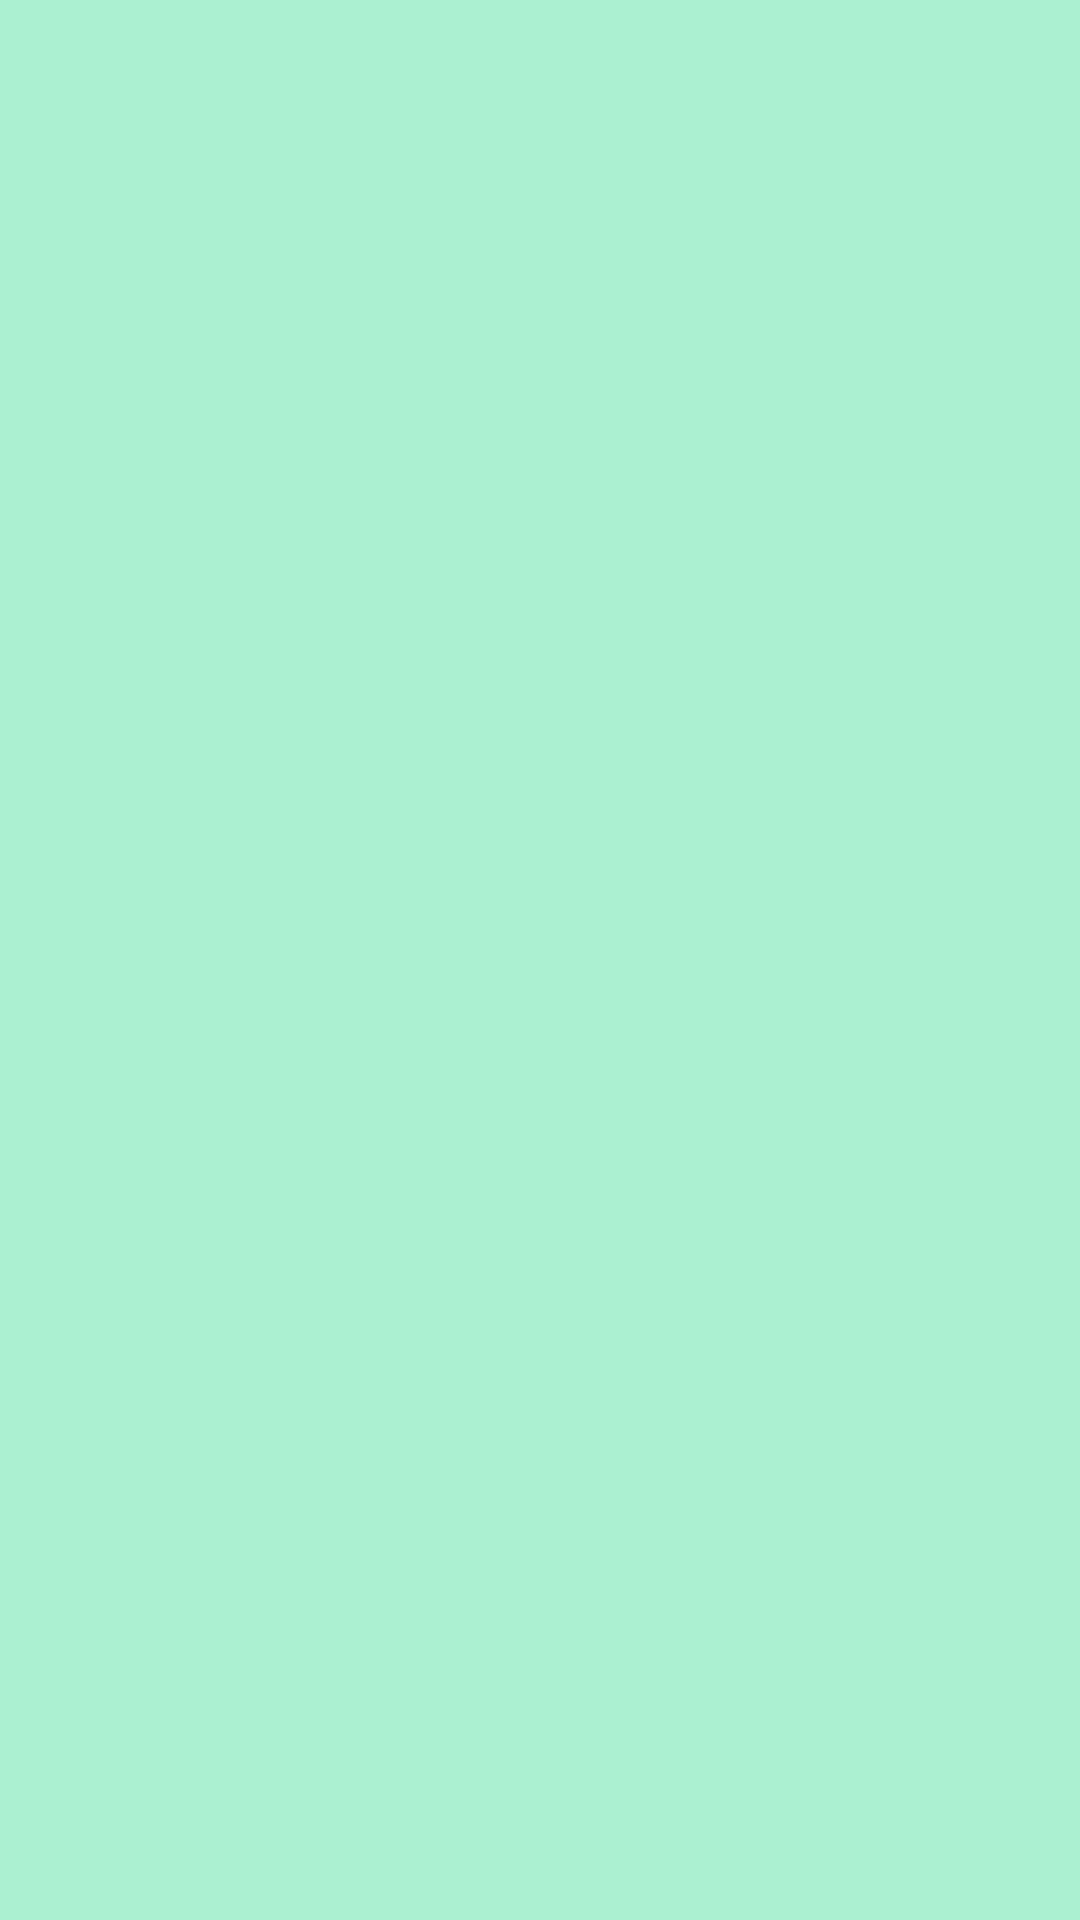 Mint Green Wallpaper iPhone HD with image resolution 1080x1920 pixel. You can use this wallpaper as background for your desktop Computer Screensavers, Android or iPhone smartphones